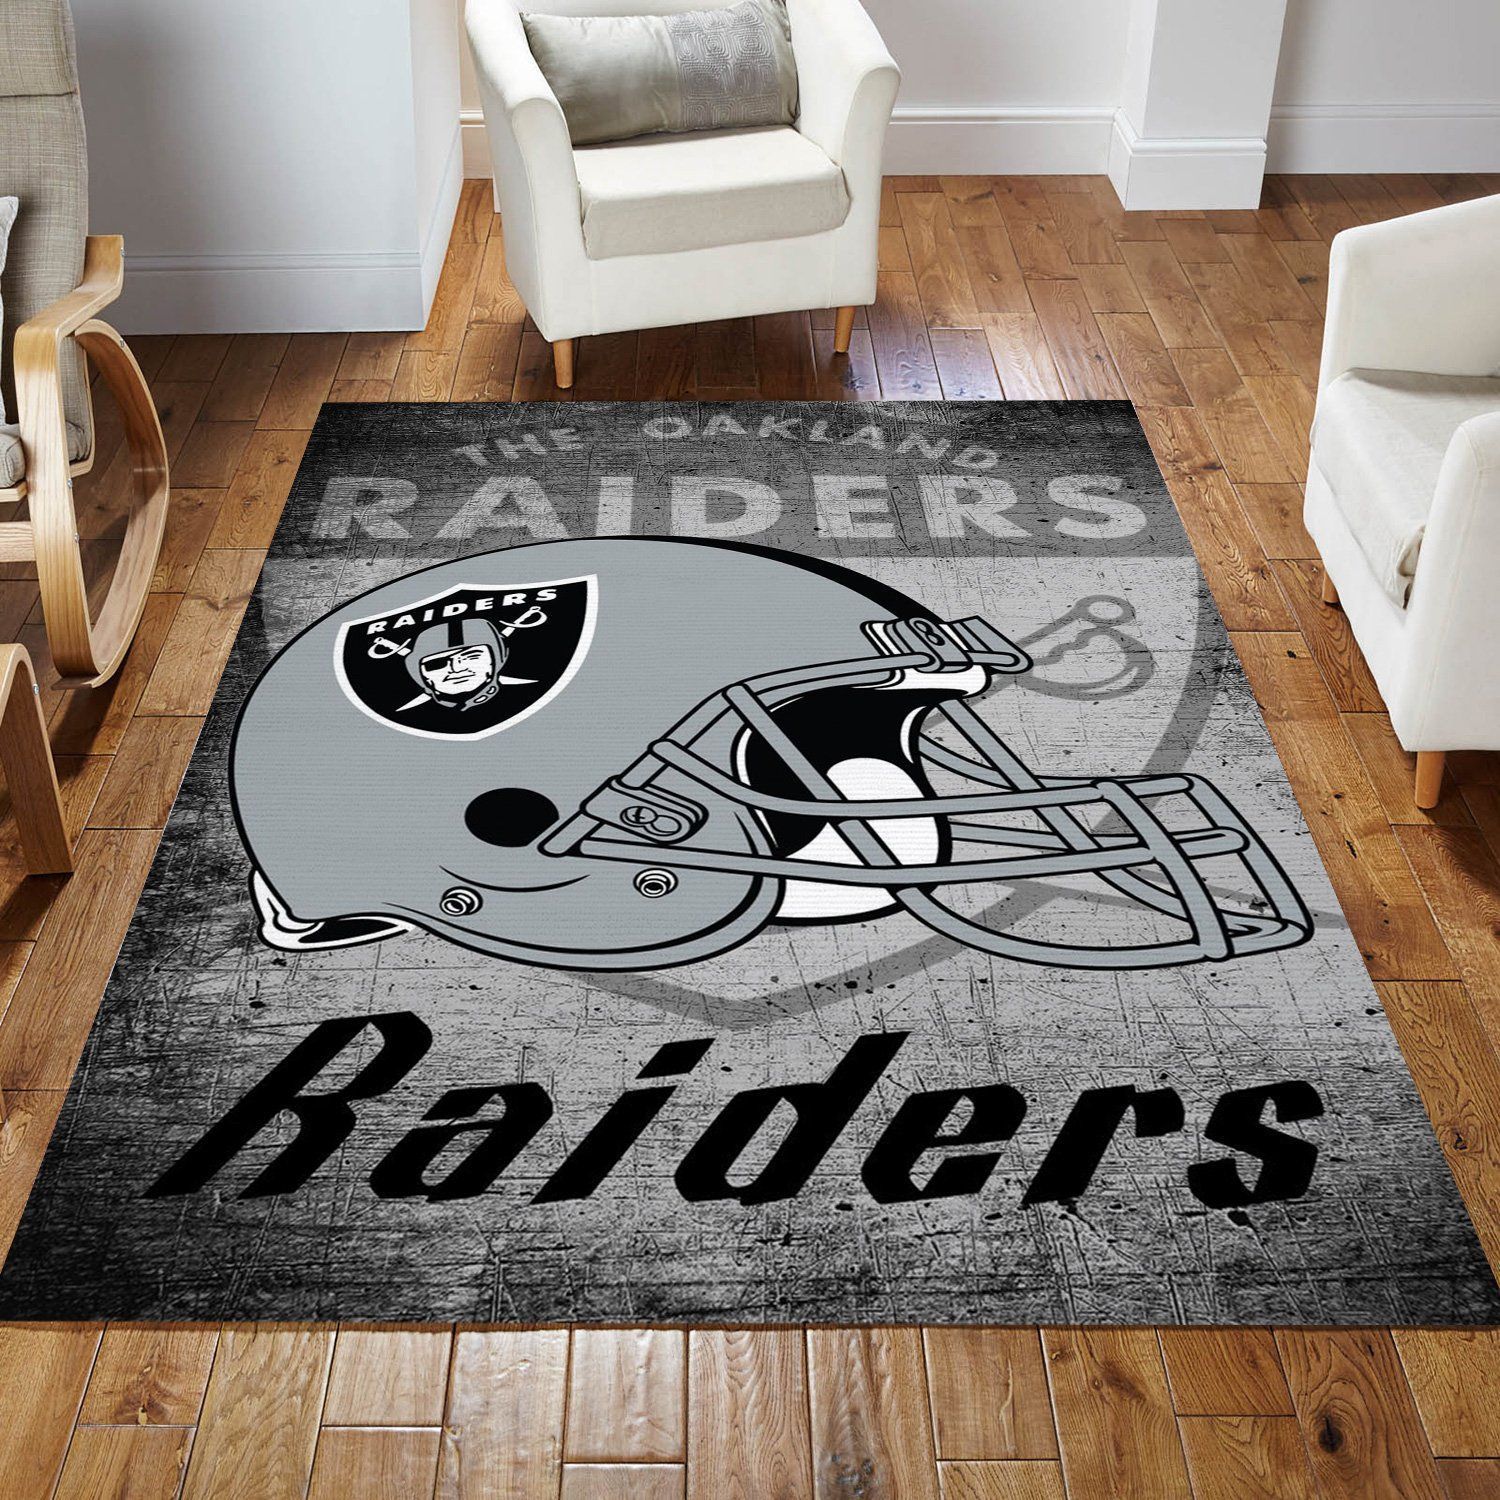 Los Angeles Raiders Retro Nfl Football Team Area Rug For Gift Living Room Rug US Gift Decor - Indoor Outdoor Rugs 2